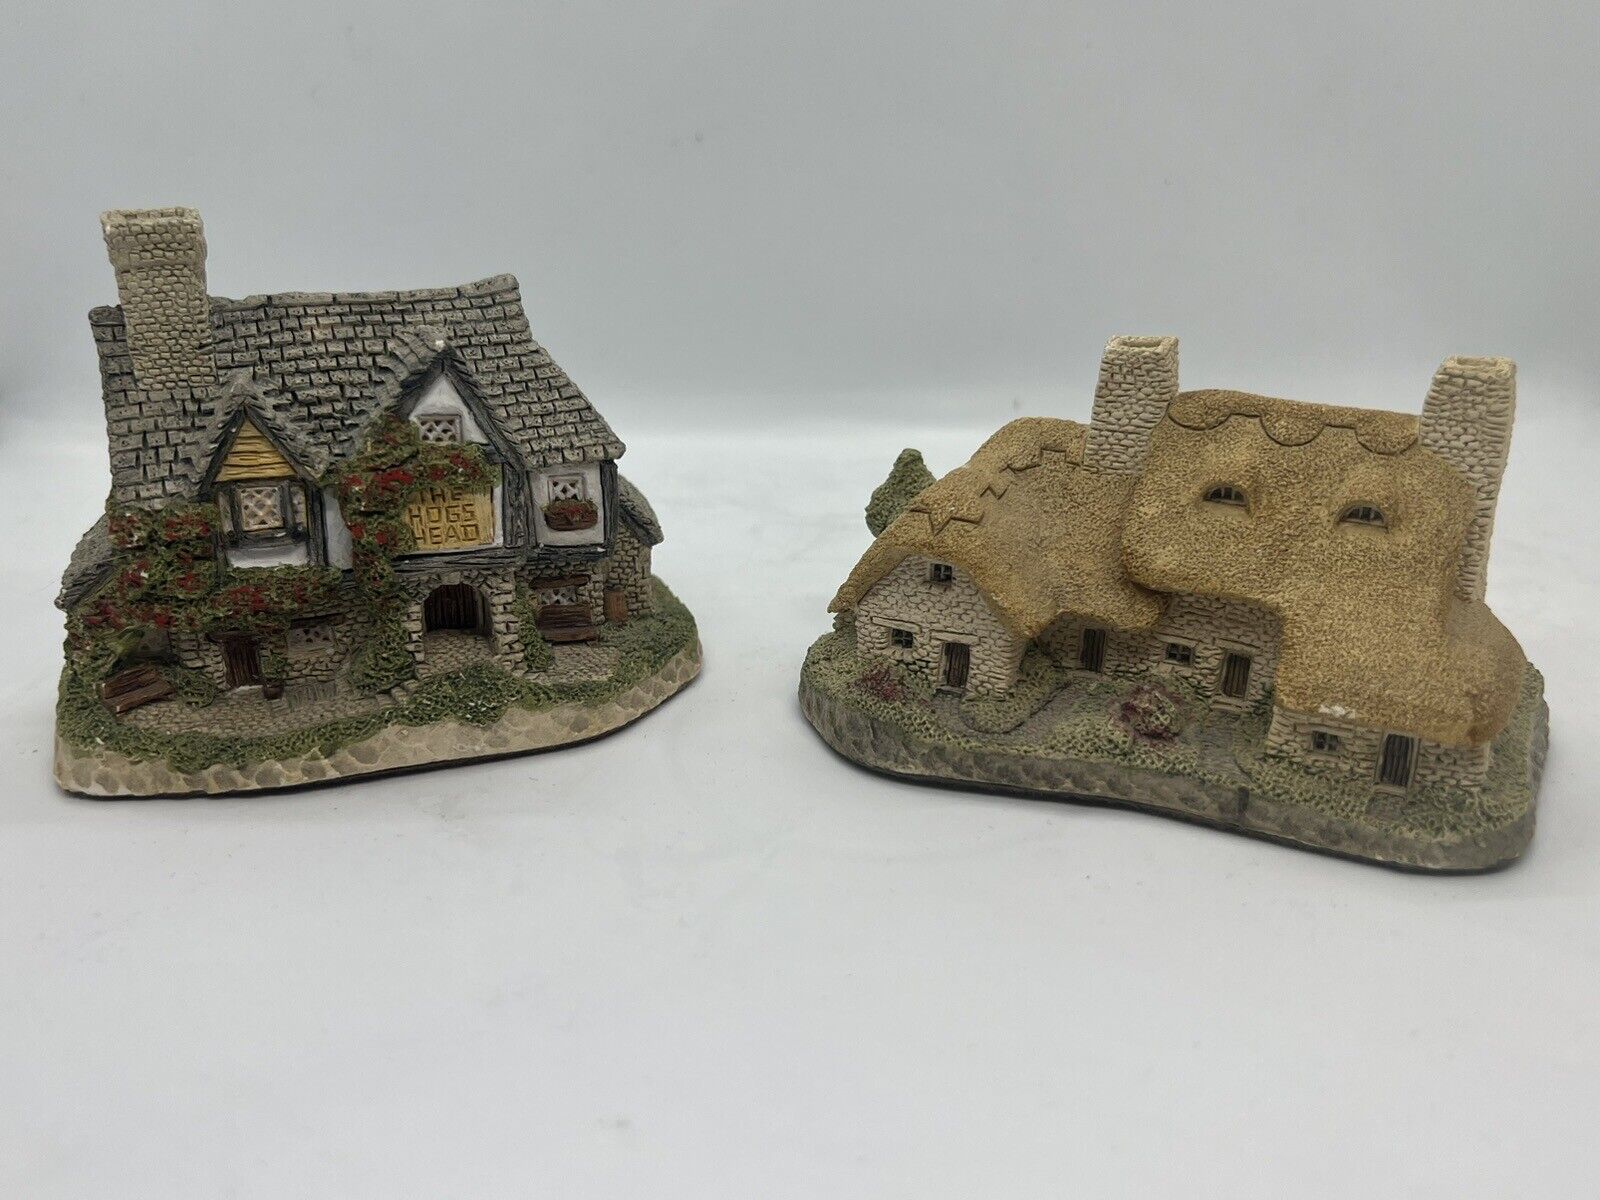 1985 David Winter Miniature Cottages. The Hogs Head, & Meadowbank cottage.